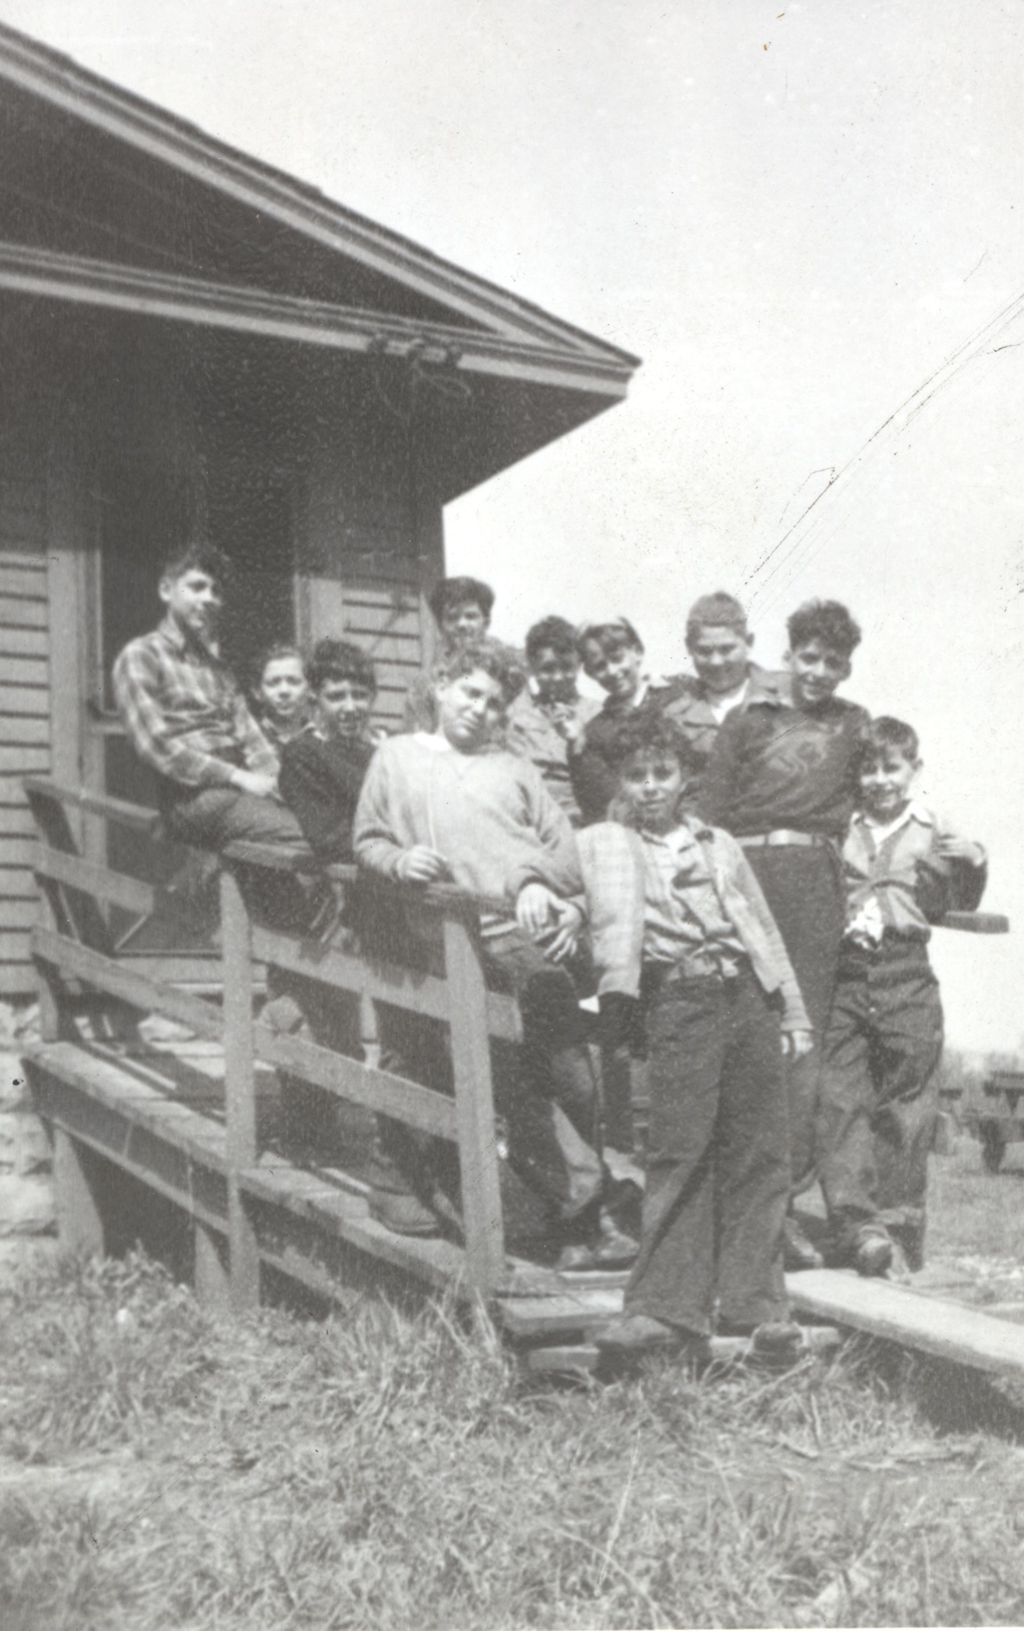 Teenage boys on a ramp outside a camp building